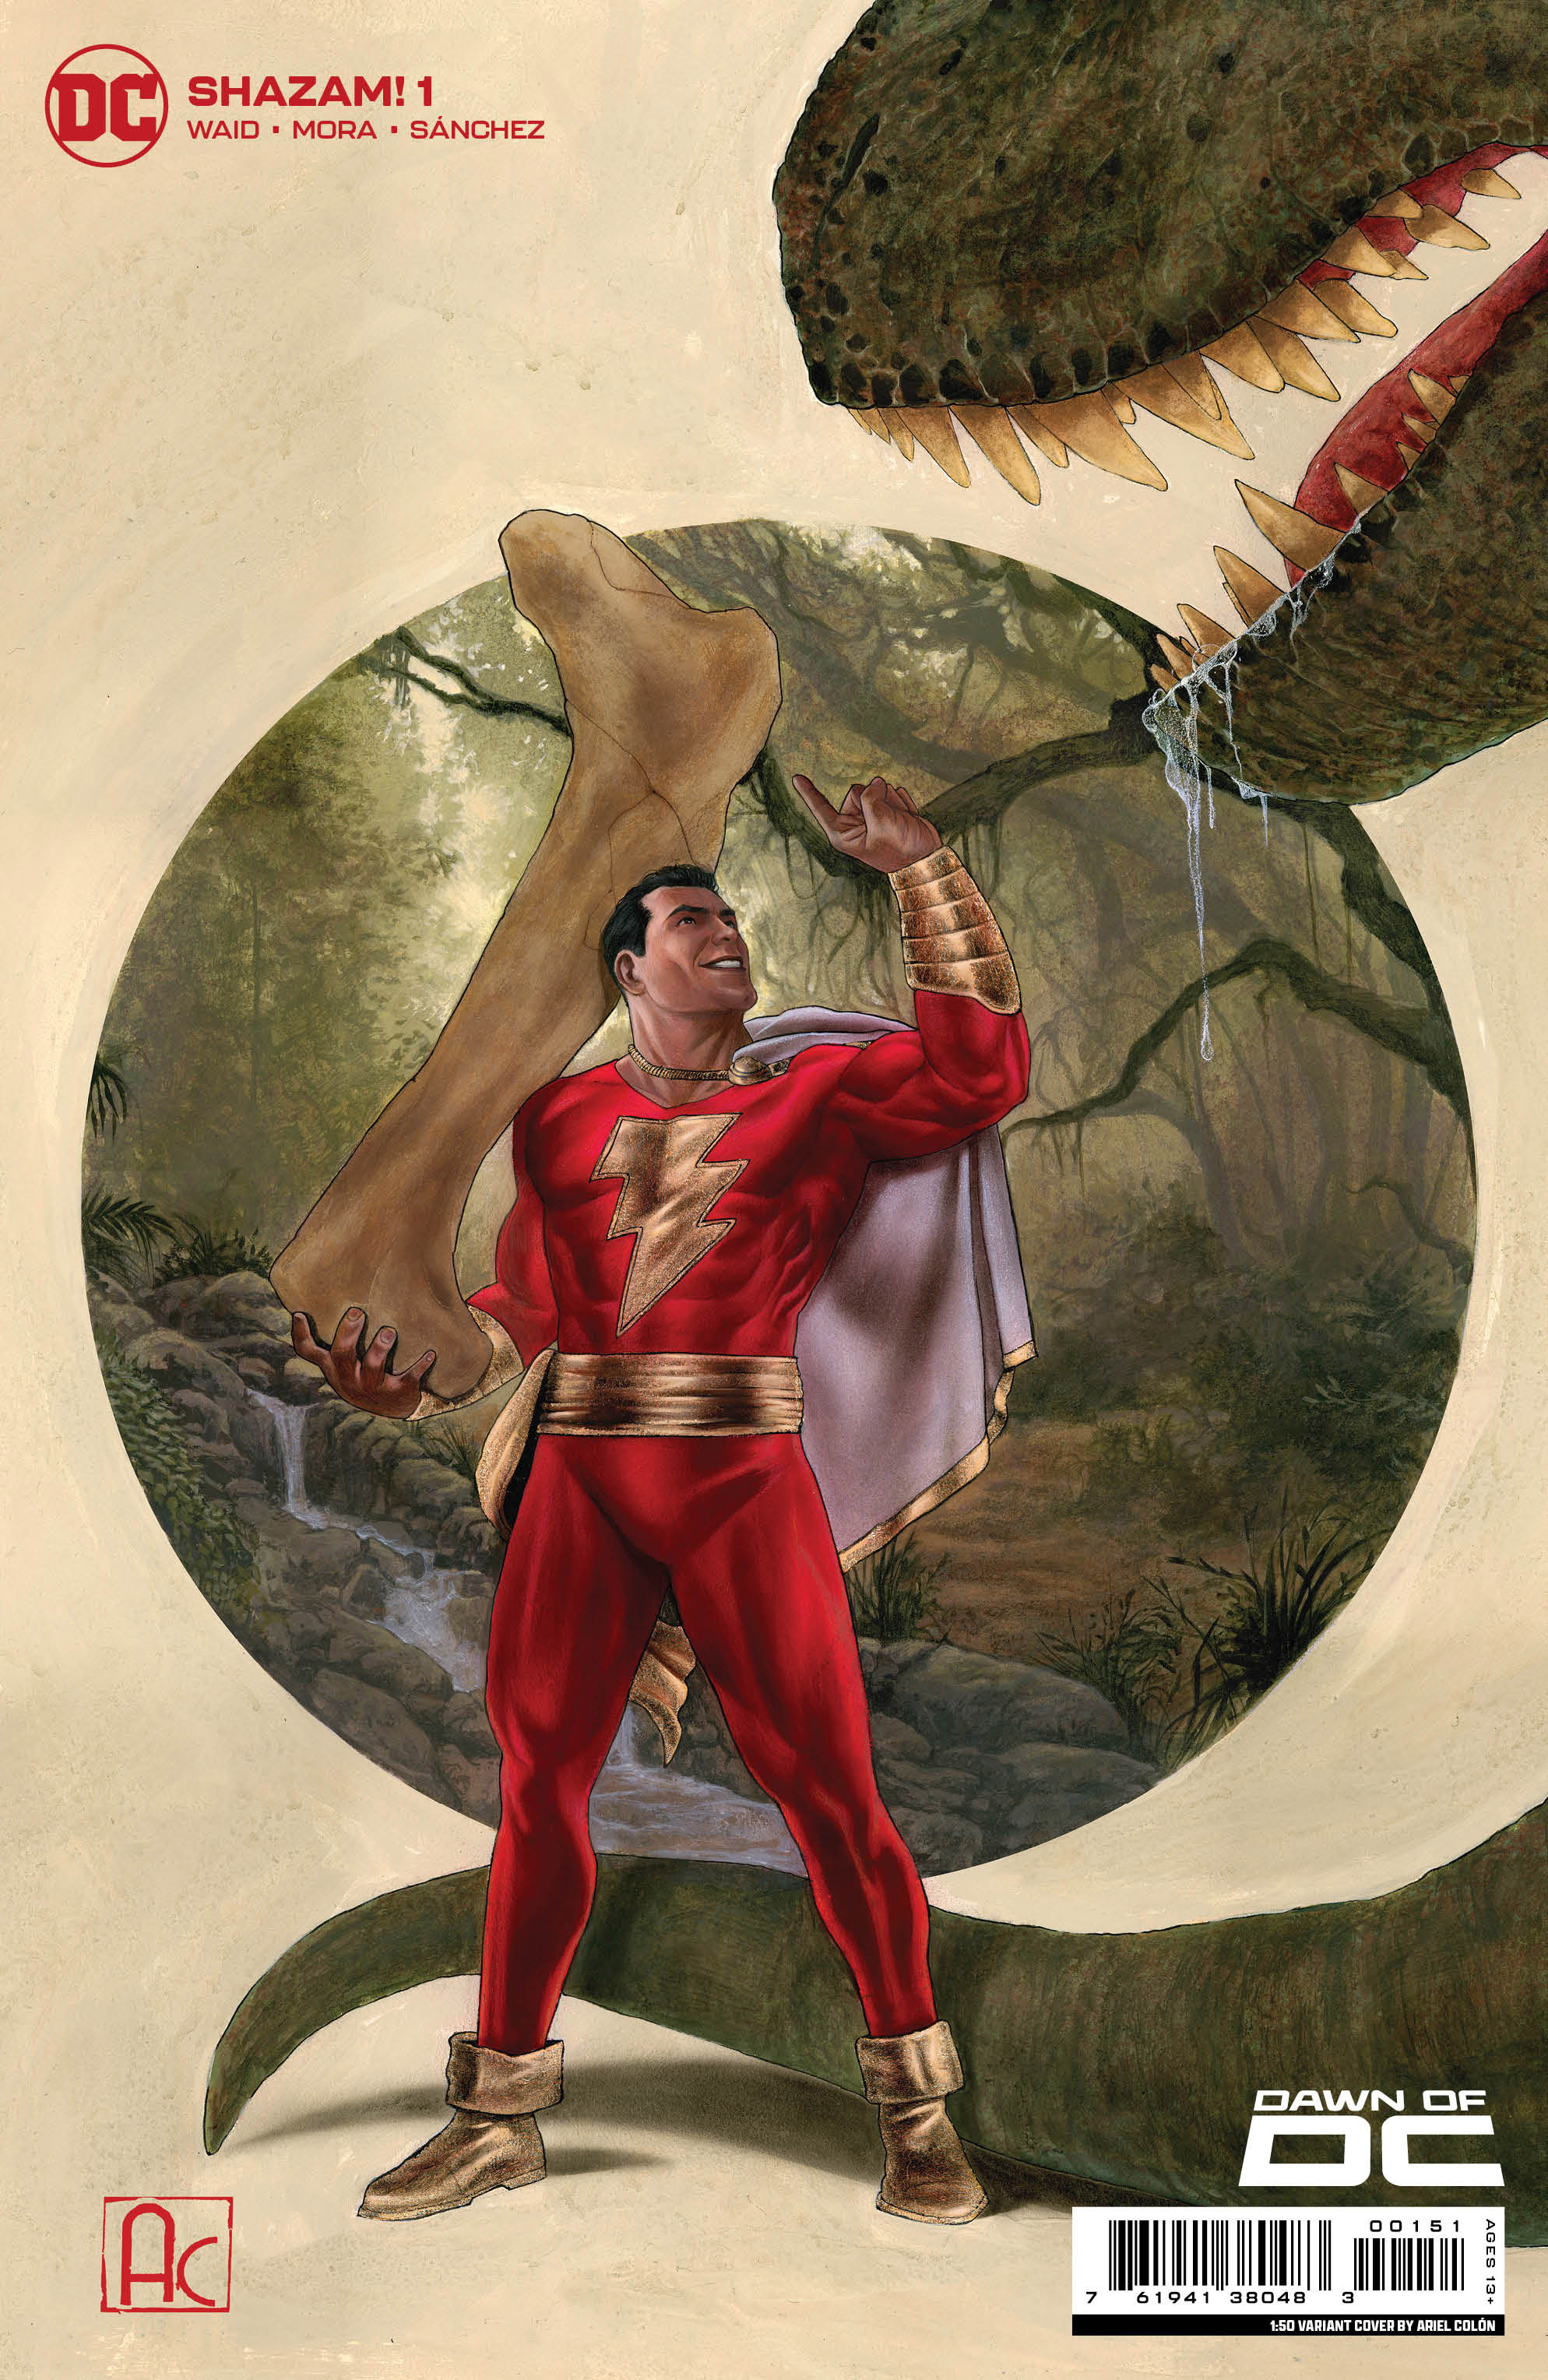 Shazam #1 Cover F 1 for 50 Incentive Ariel Colon Card Stock Variant